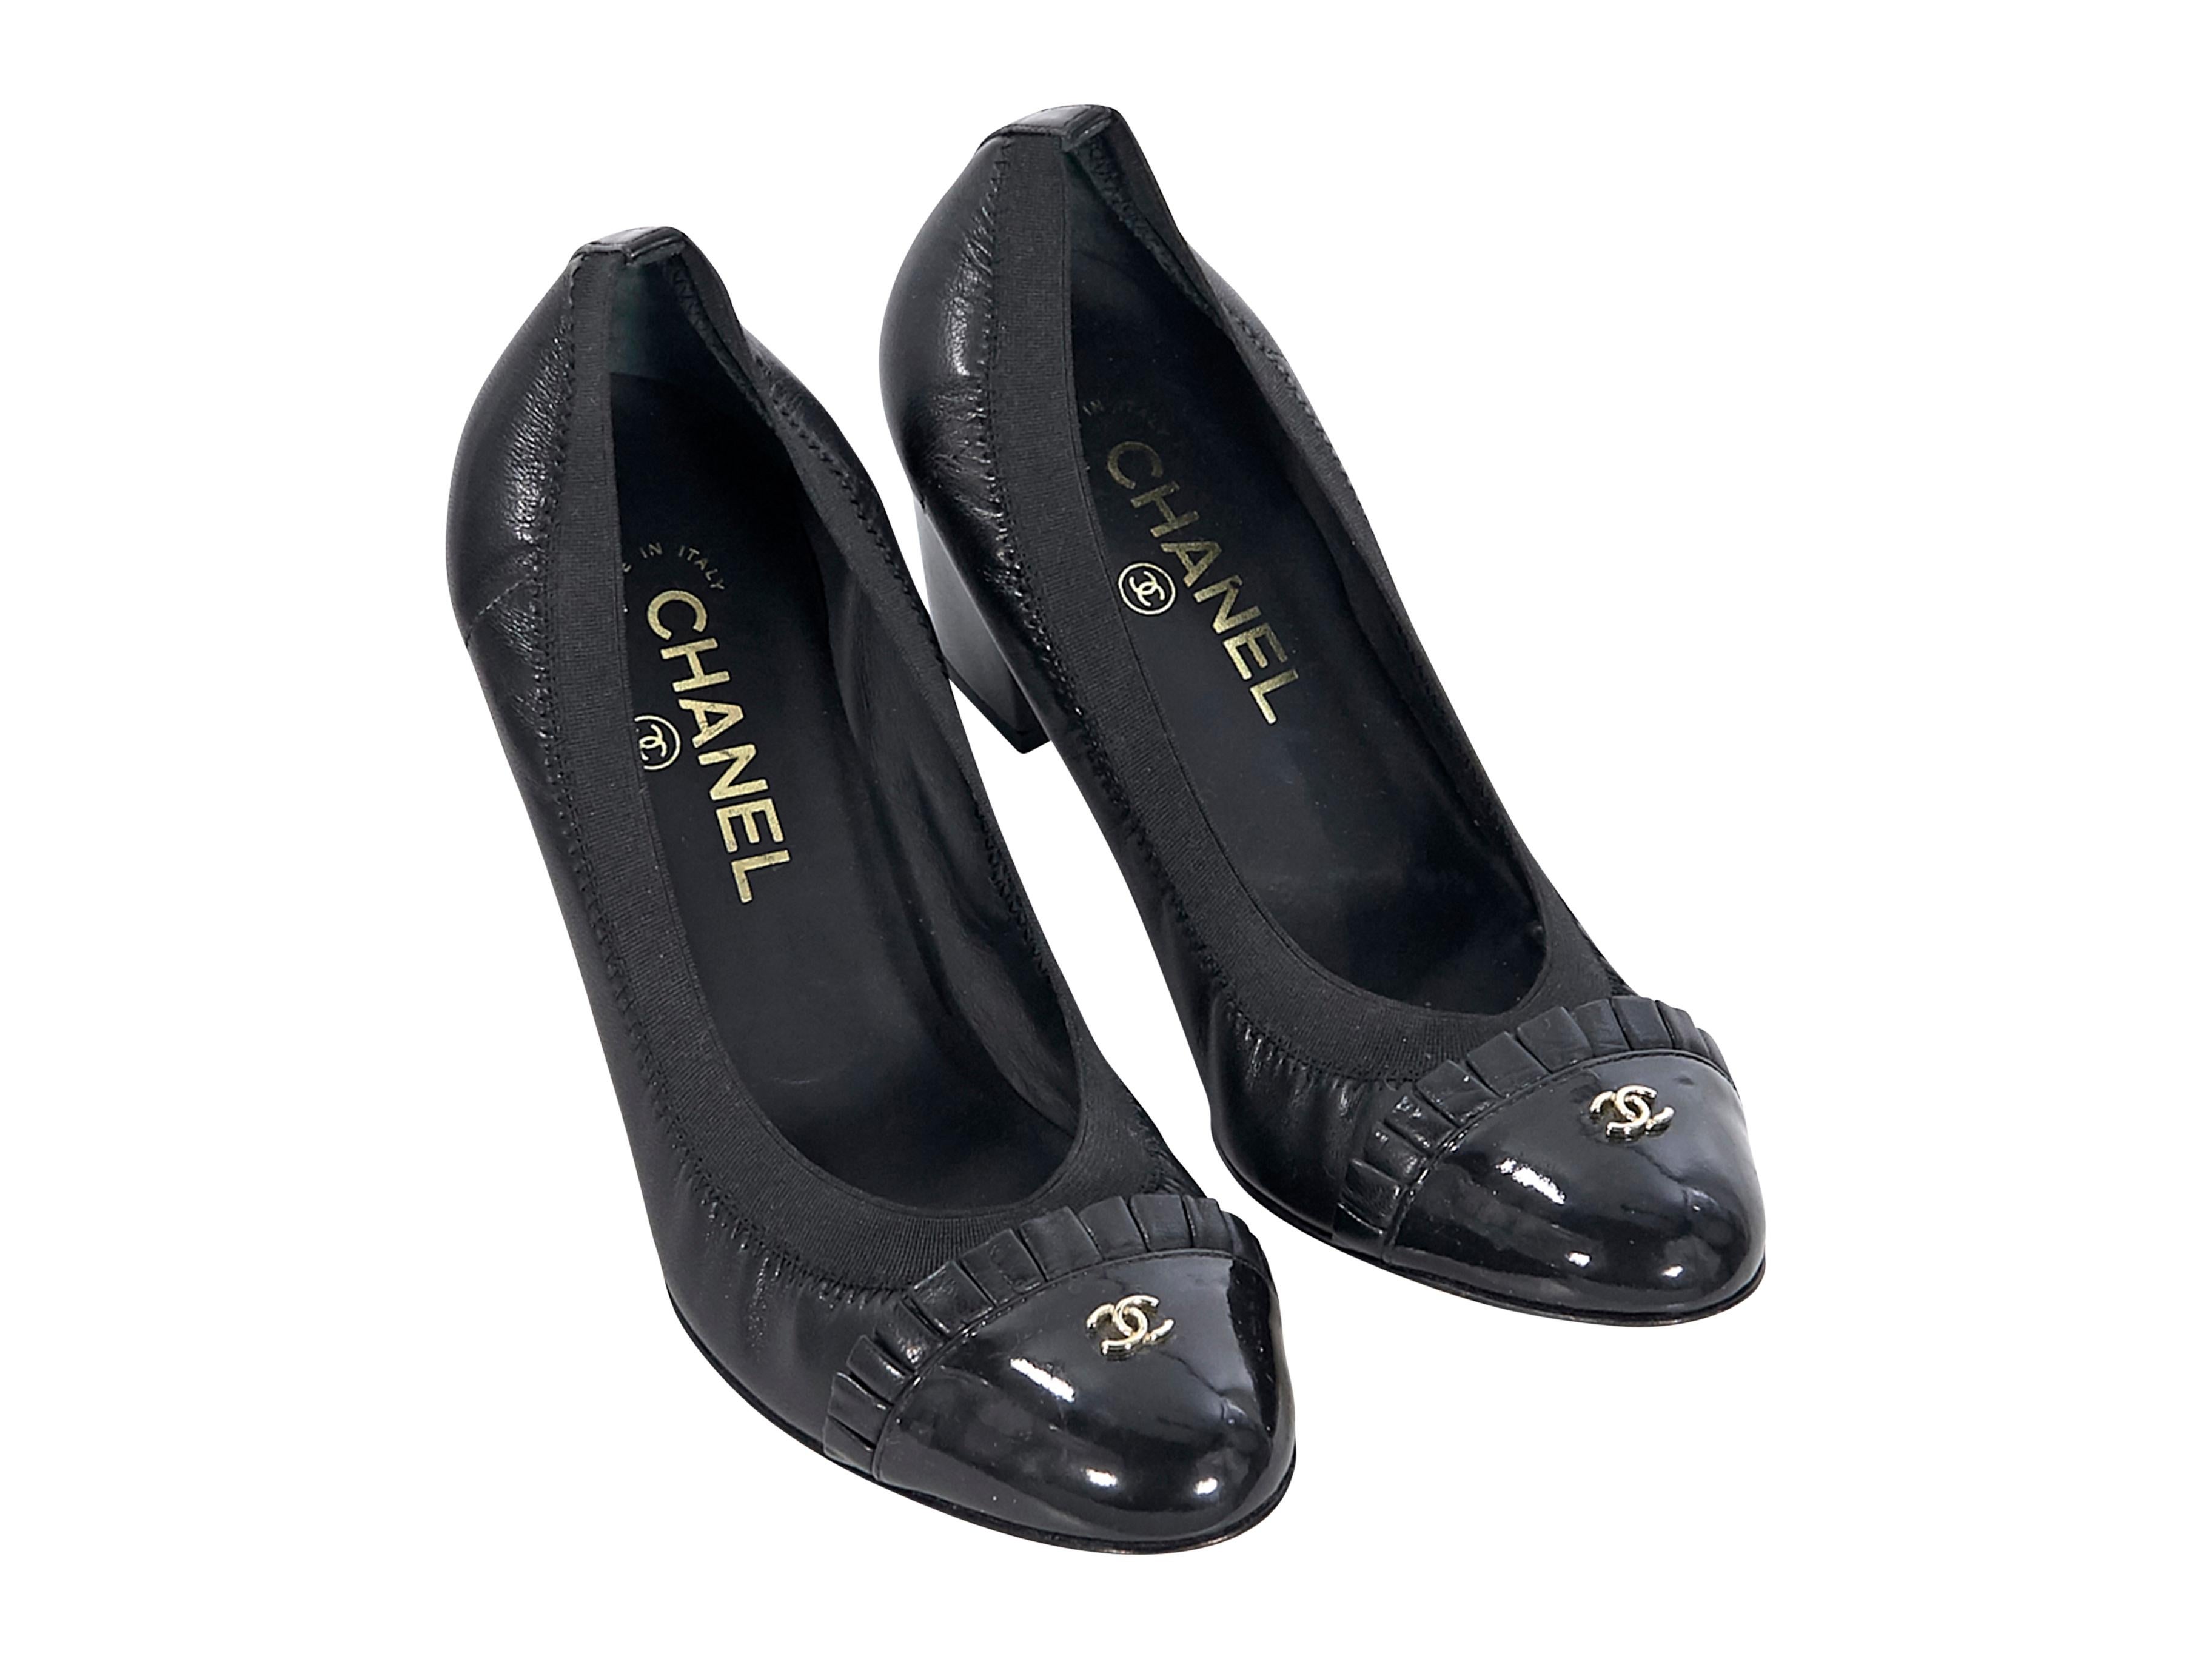 Product details:  Black leather kitten heels by Chanel.  Stretch-fit top line for a comfy fit.  Ruffled patent leather cap toe.  Slip-on style.  
Condition: Pre-owned. Very good.
Est. Retail $ 925.00